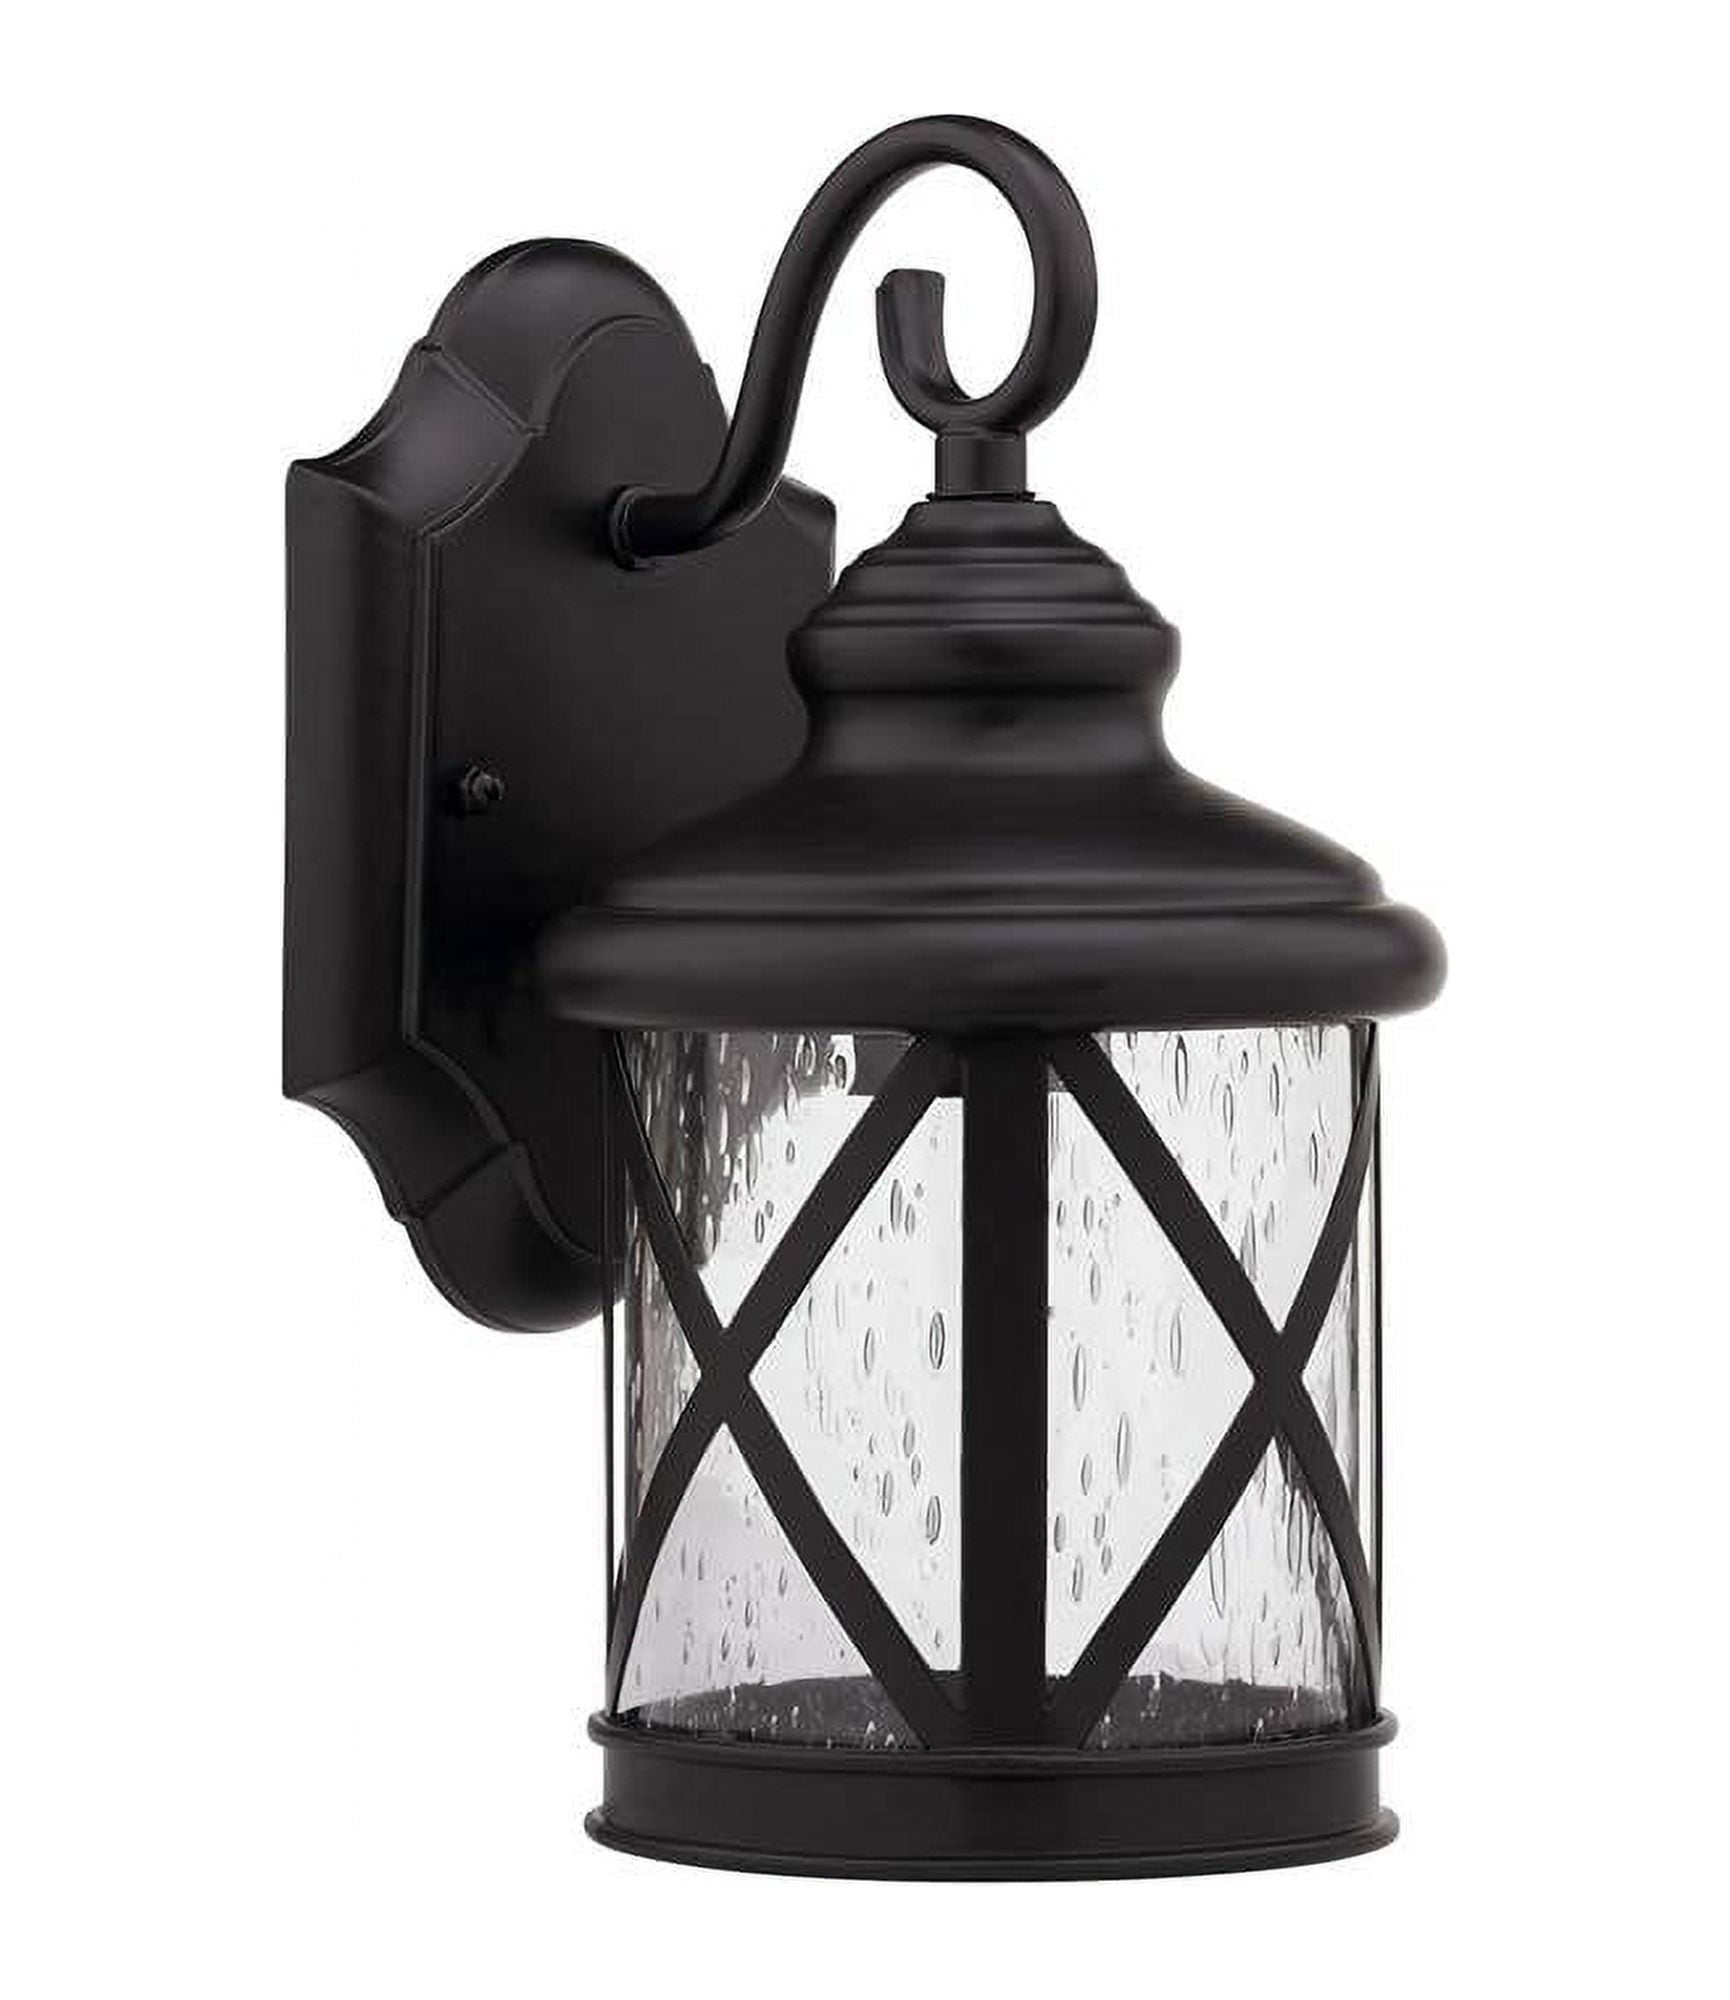 Ch25041rb16-od1 16 In. Lighting Milania Adora Transitional 1 Light Rubbed Bronze Outdoor Wall Sconce - Oil Rubbed Bronze